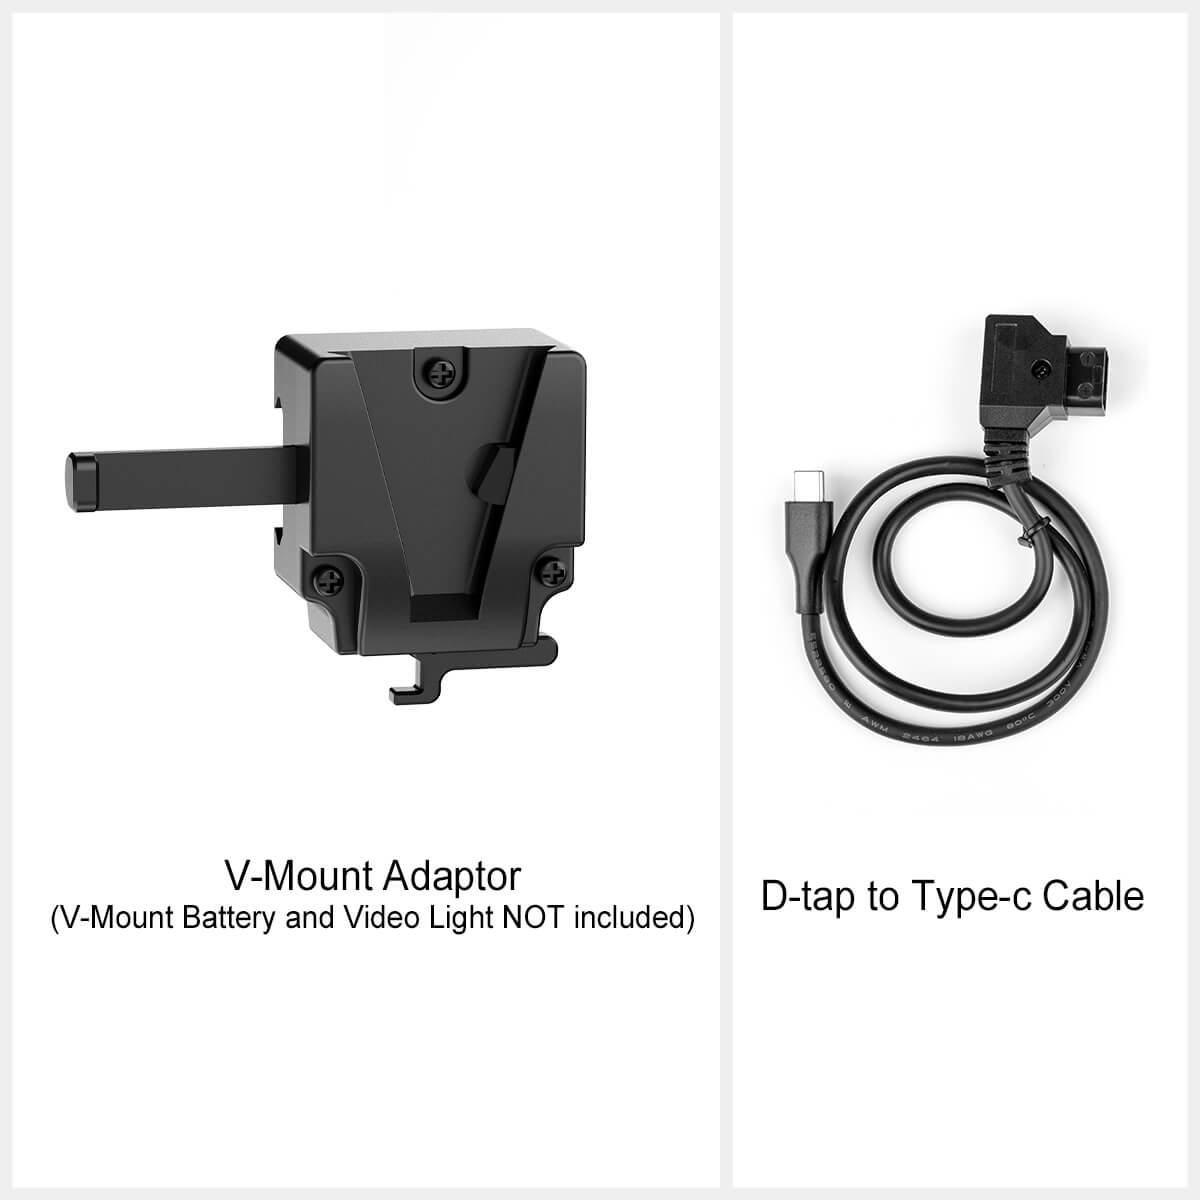 COLBOR VM2's package includes a v-mount adapter to hold v-lock batteries and a d-tap to Type-C cable for charging